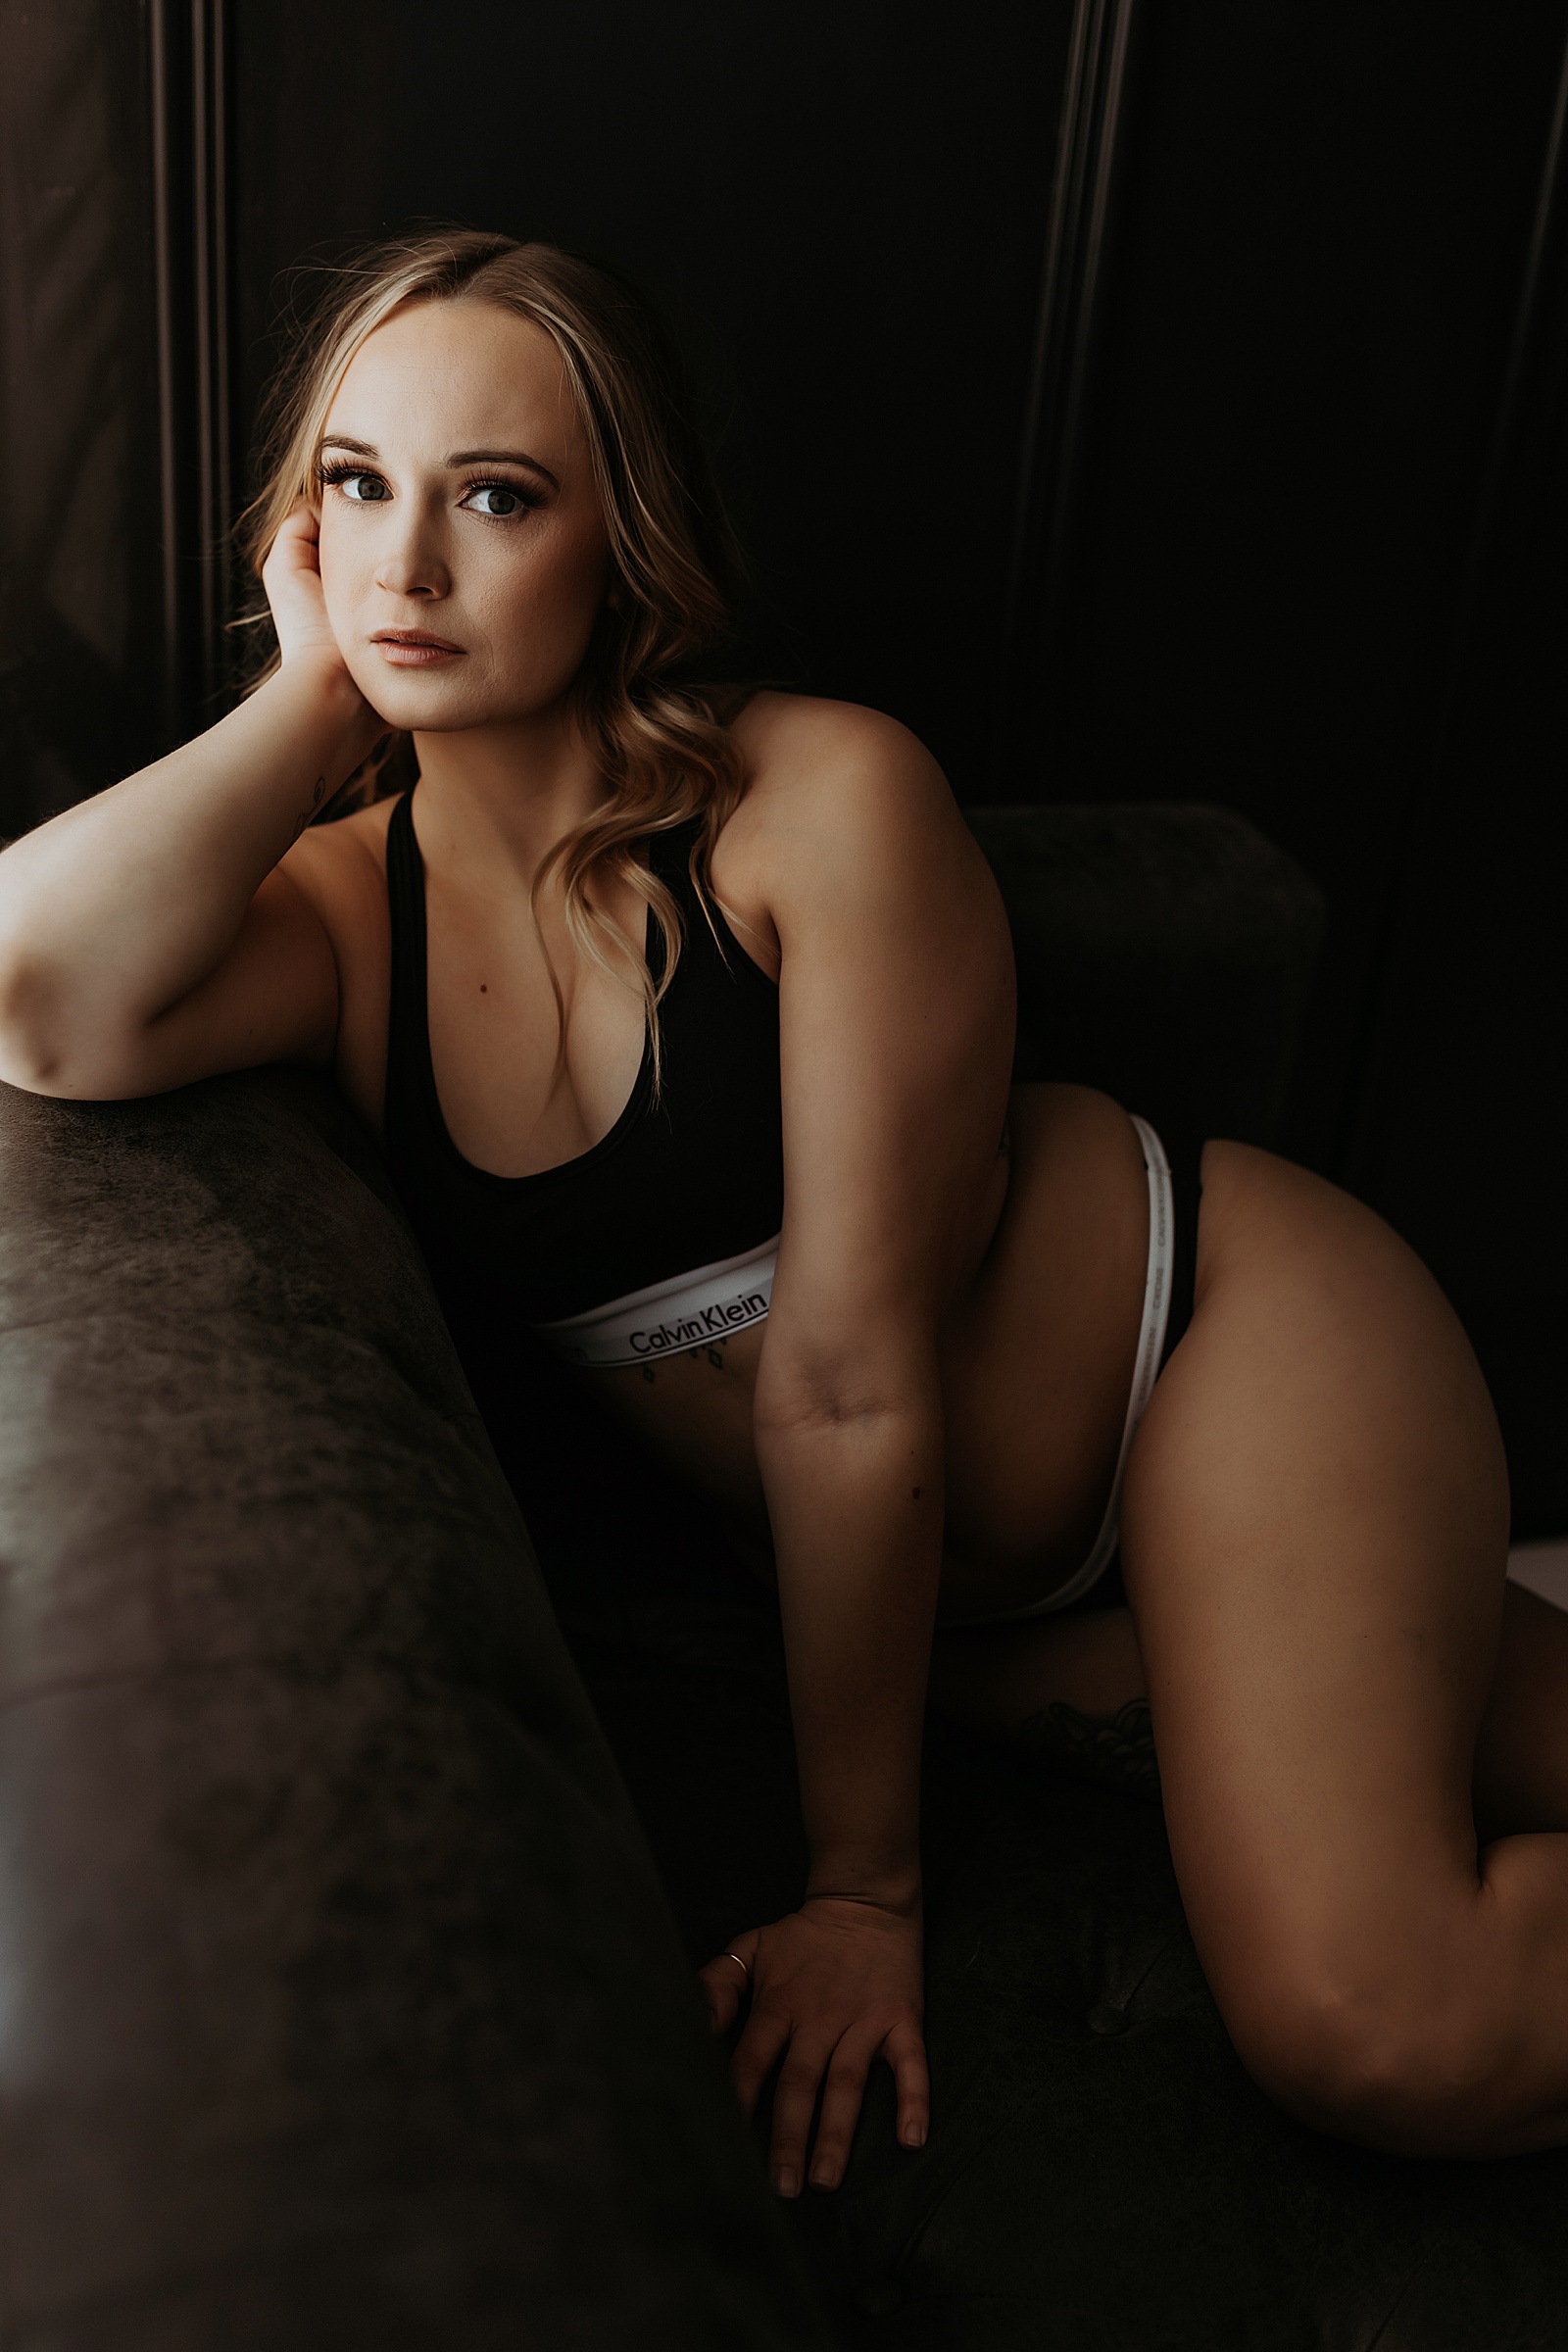 Woman wearing a two piece lingerie Calvin Klein set while sitting on a leather couch